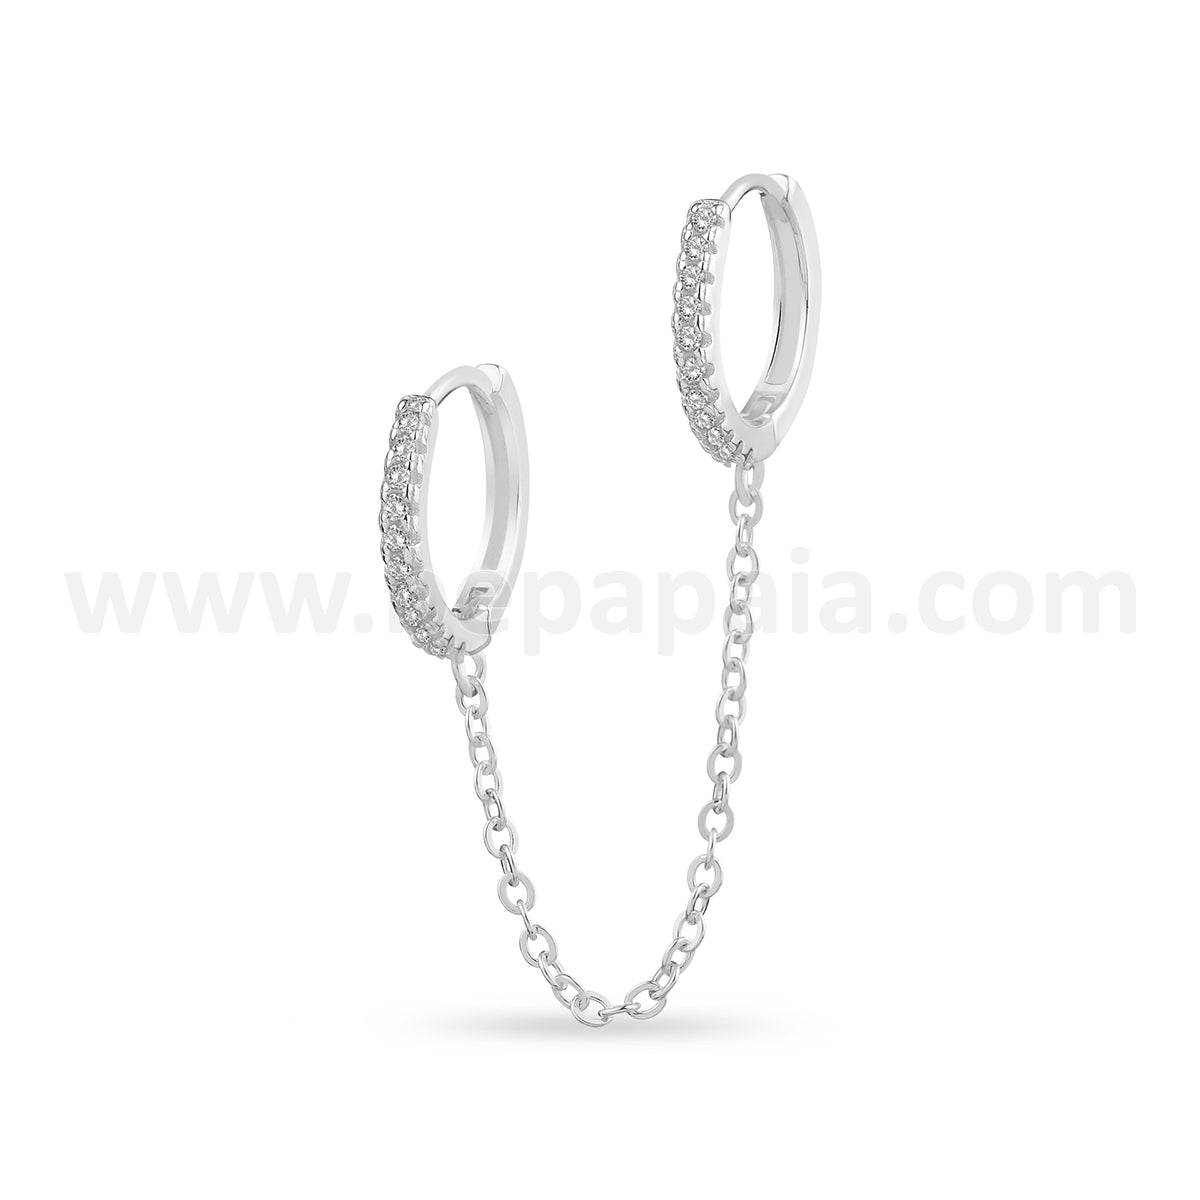 Two silver hoop earrings with multi-zircons and chain